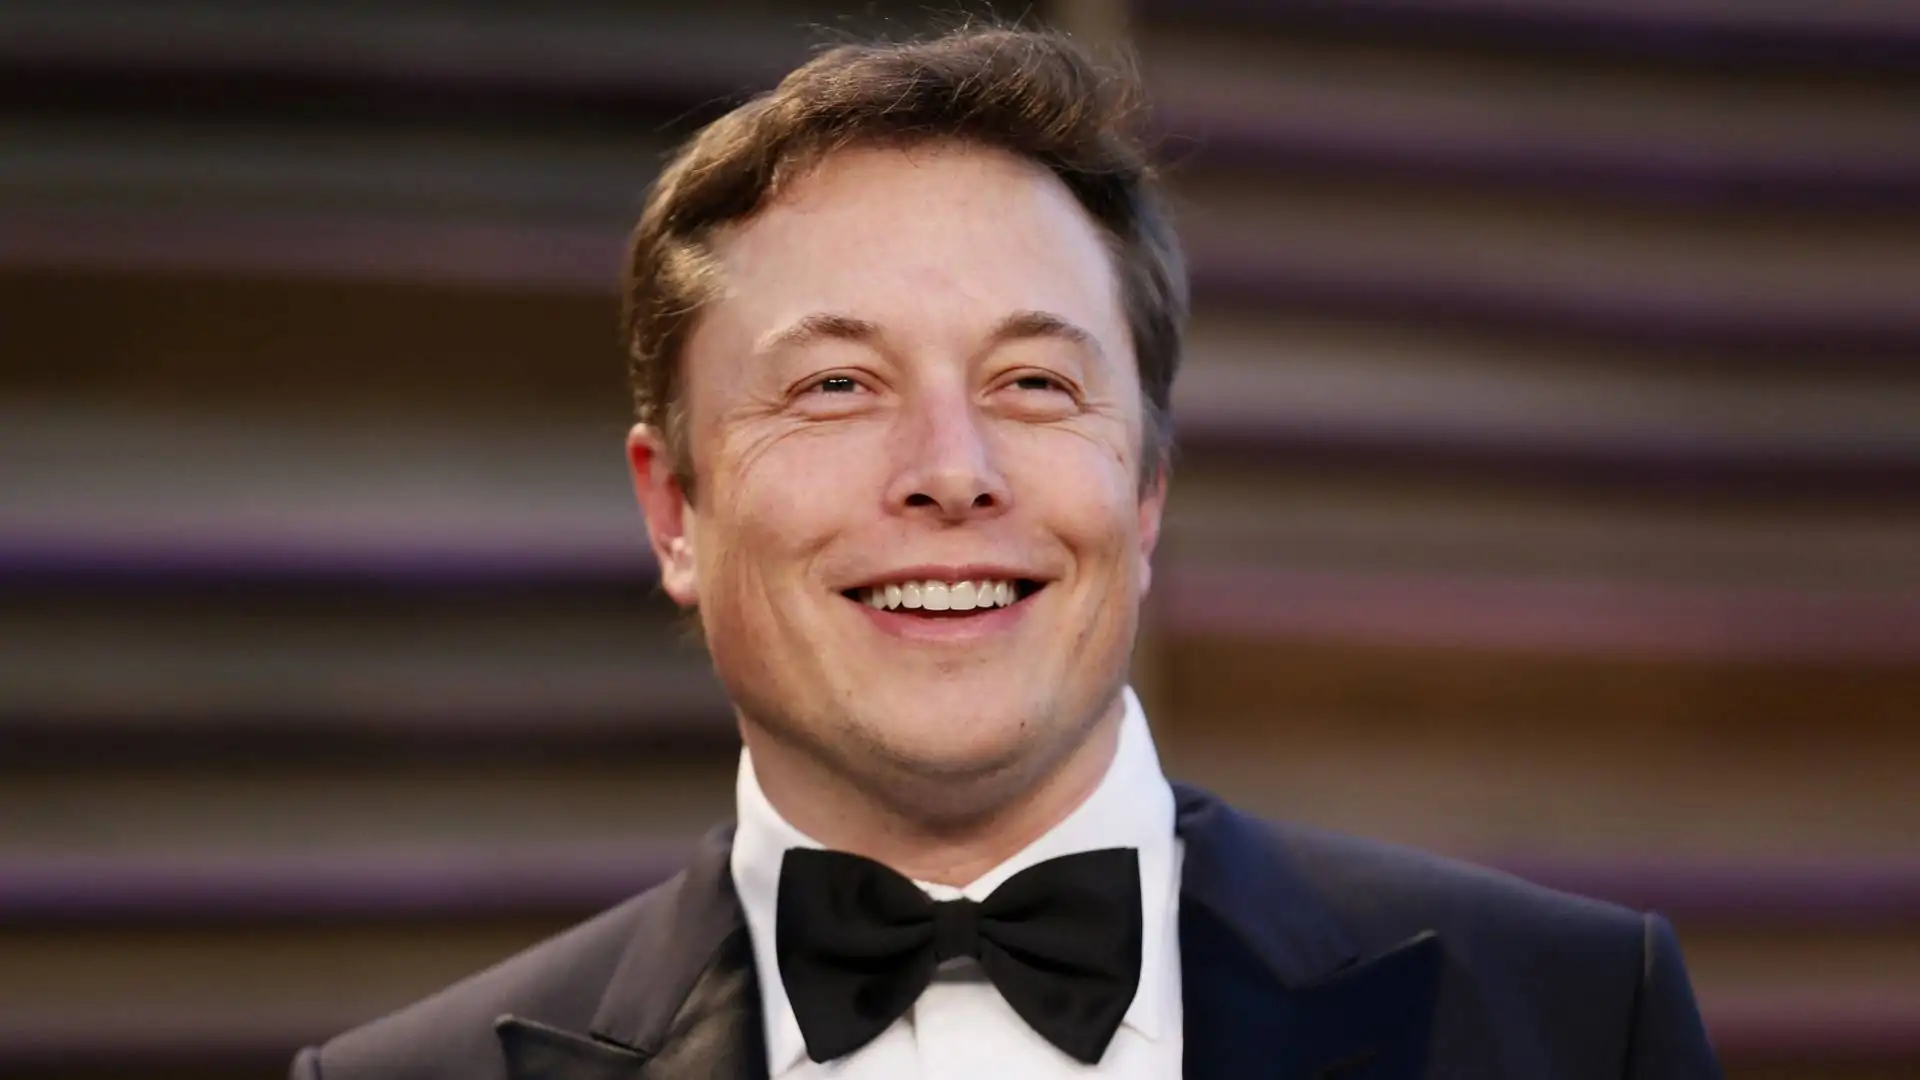 Elon Musk Sounds the Alarm Could America's Spending Lead to Bankruptcy What It Means for You---